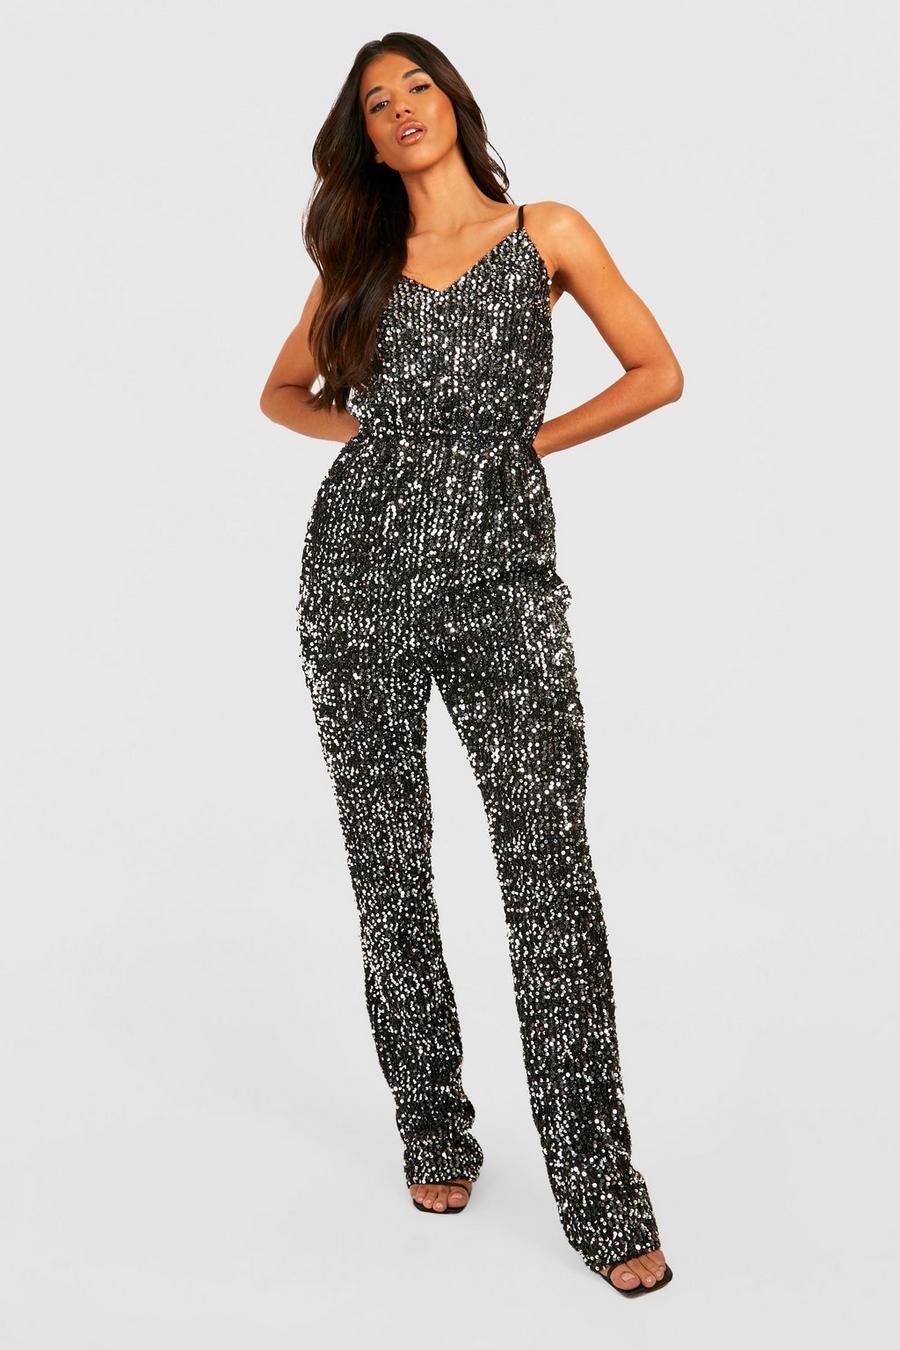 Missguided, Pants & Jumpsuits, Missguided Ski Salopette In Black